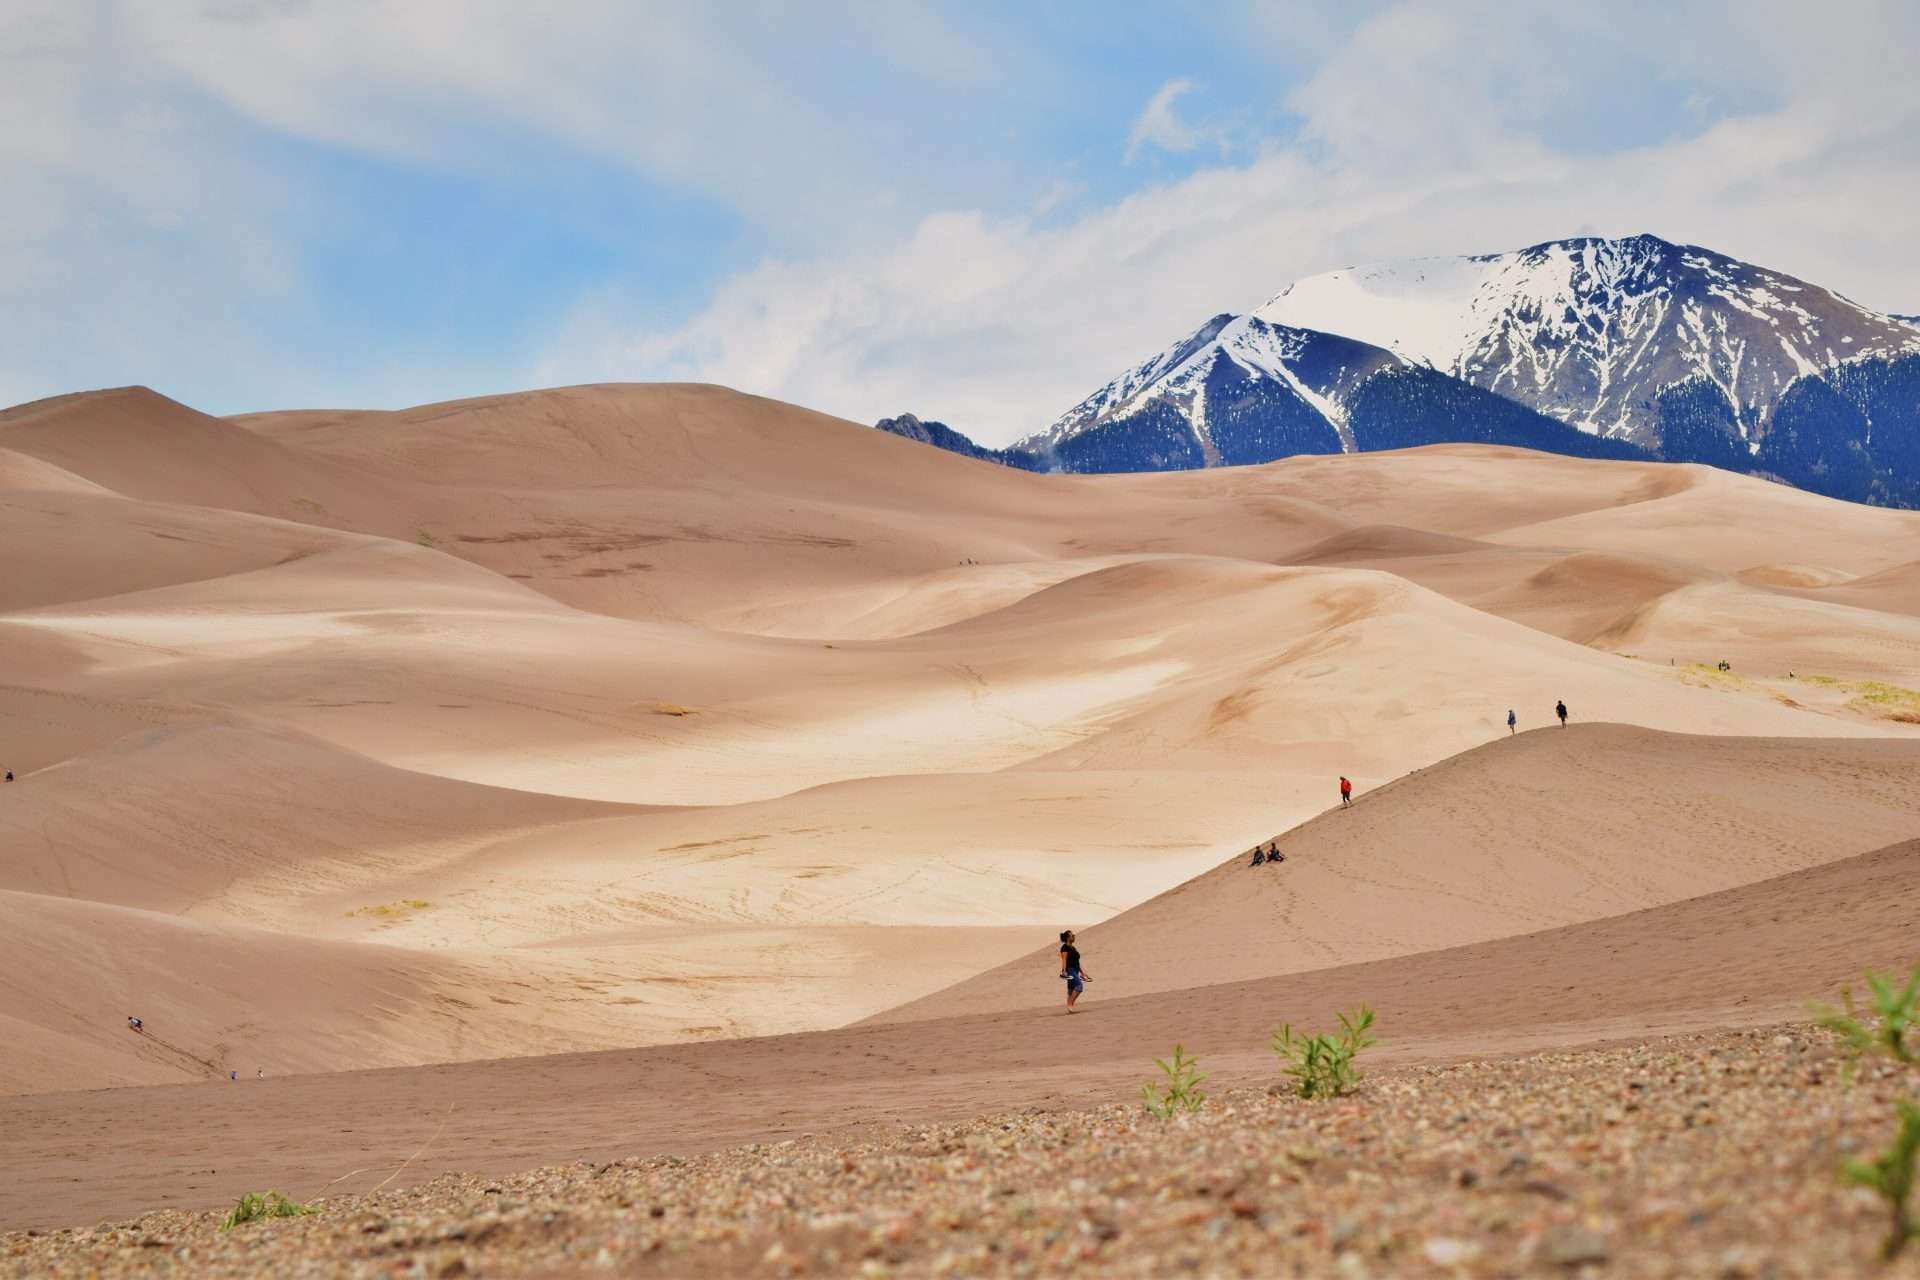 Sand dunes with snow mountain in the background.